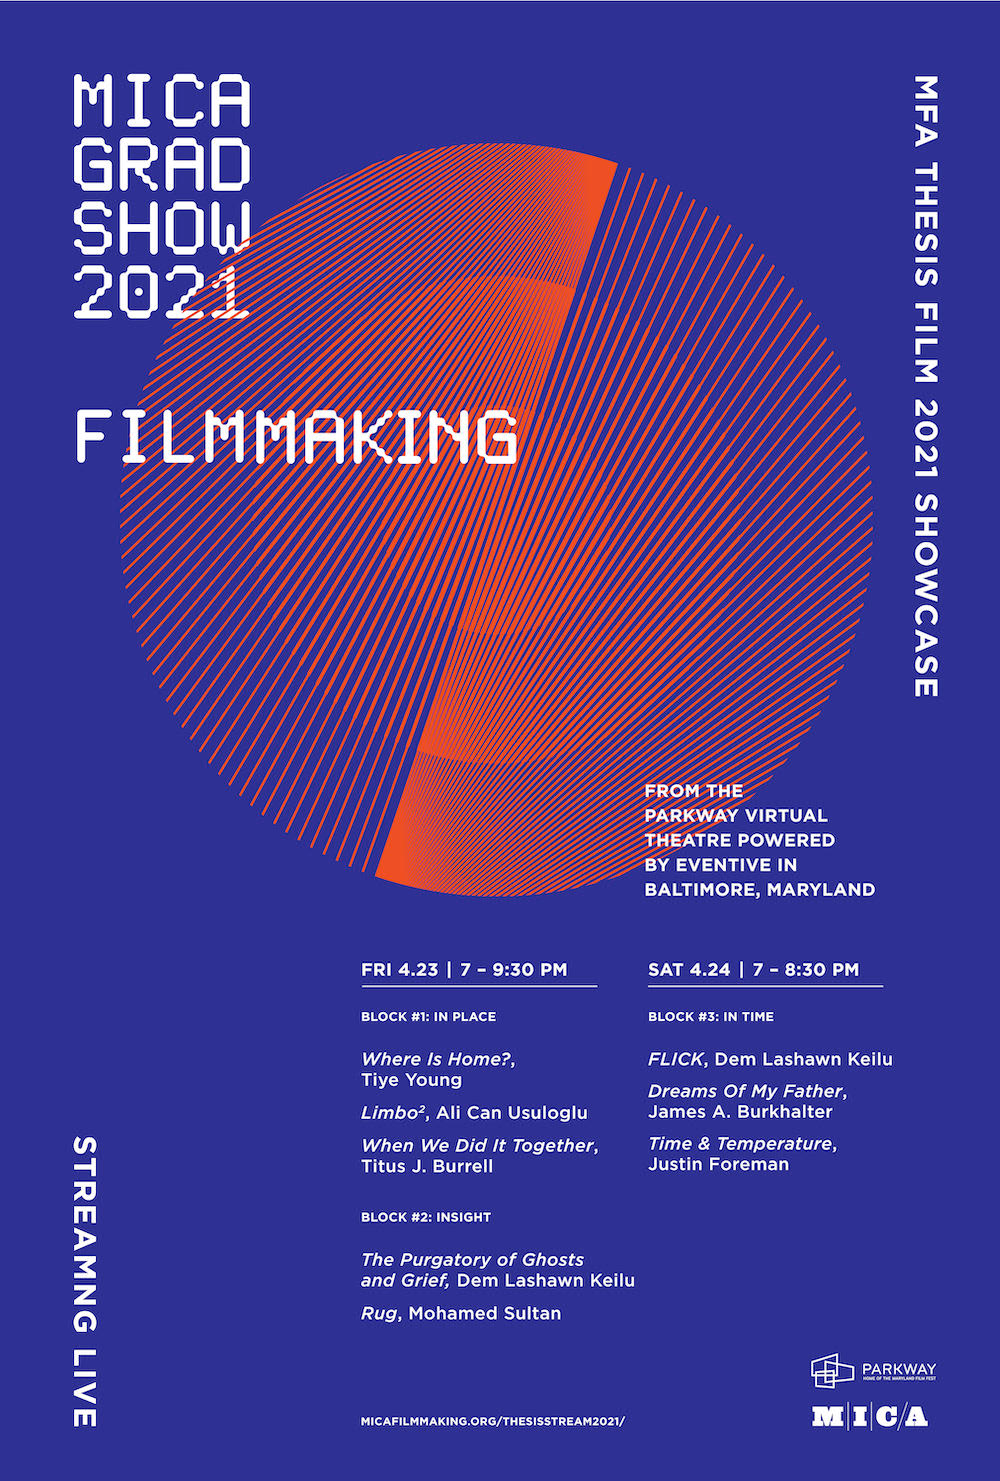 thesis on filmmaking